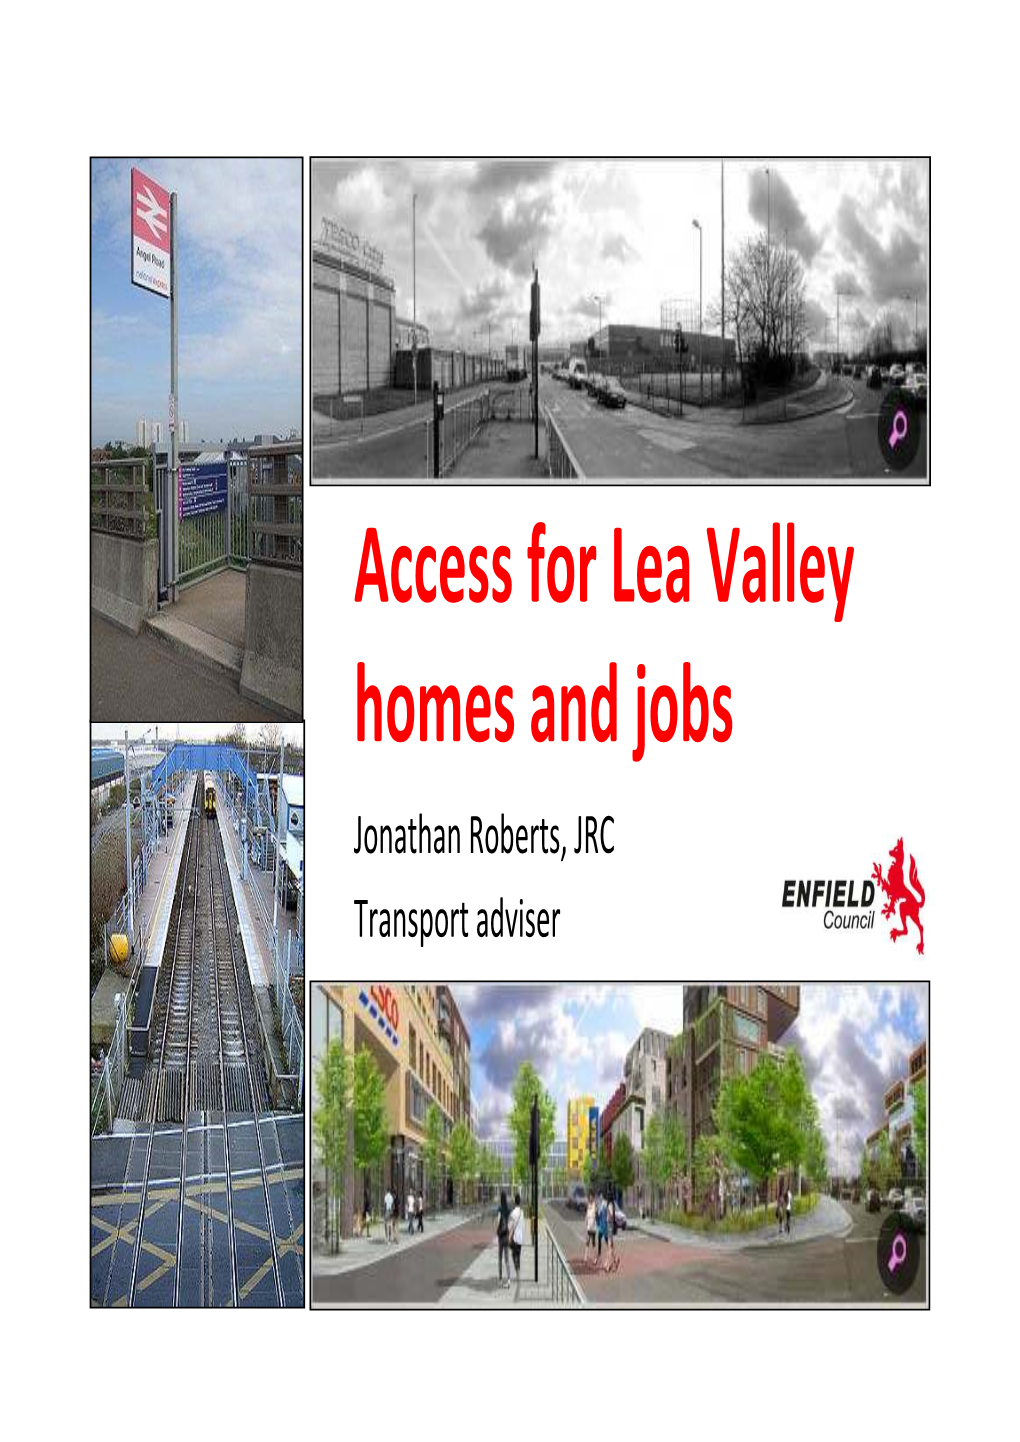 Access for Lee Valley Homes and Jobs